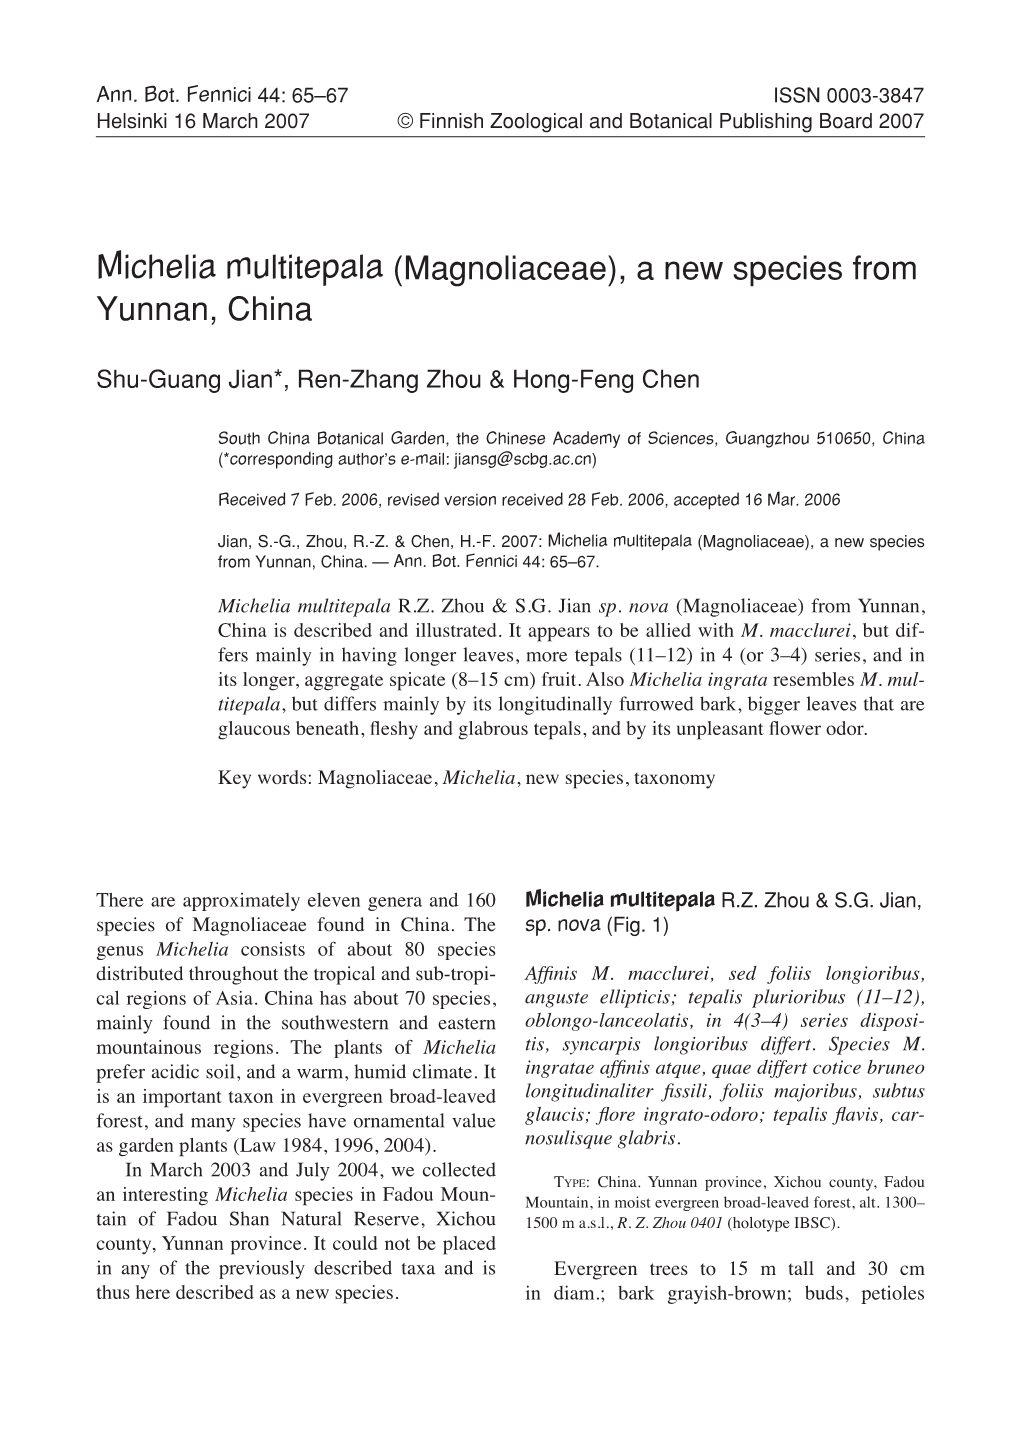 Michelia Multitepala (Magnoliaceae), a New Species from Yunnan, China